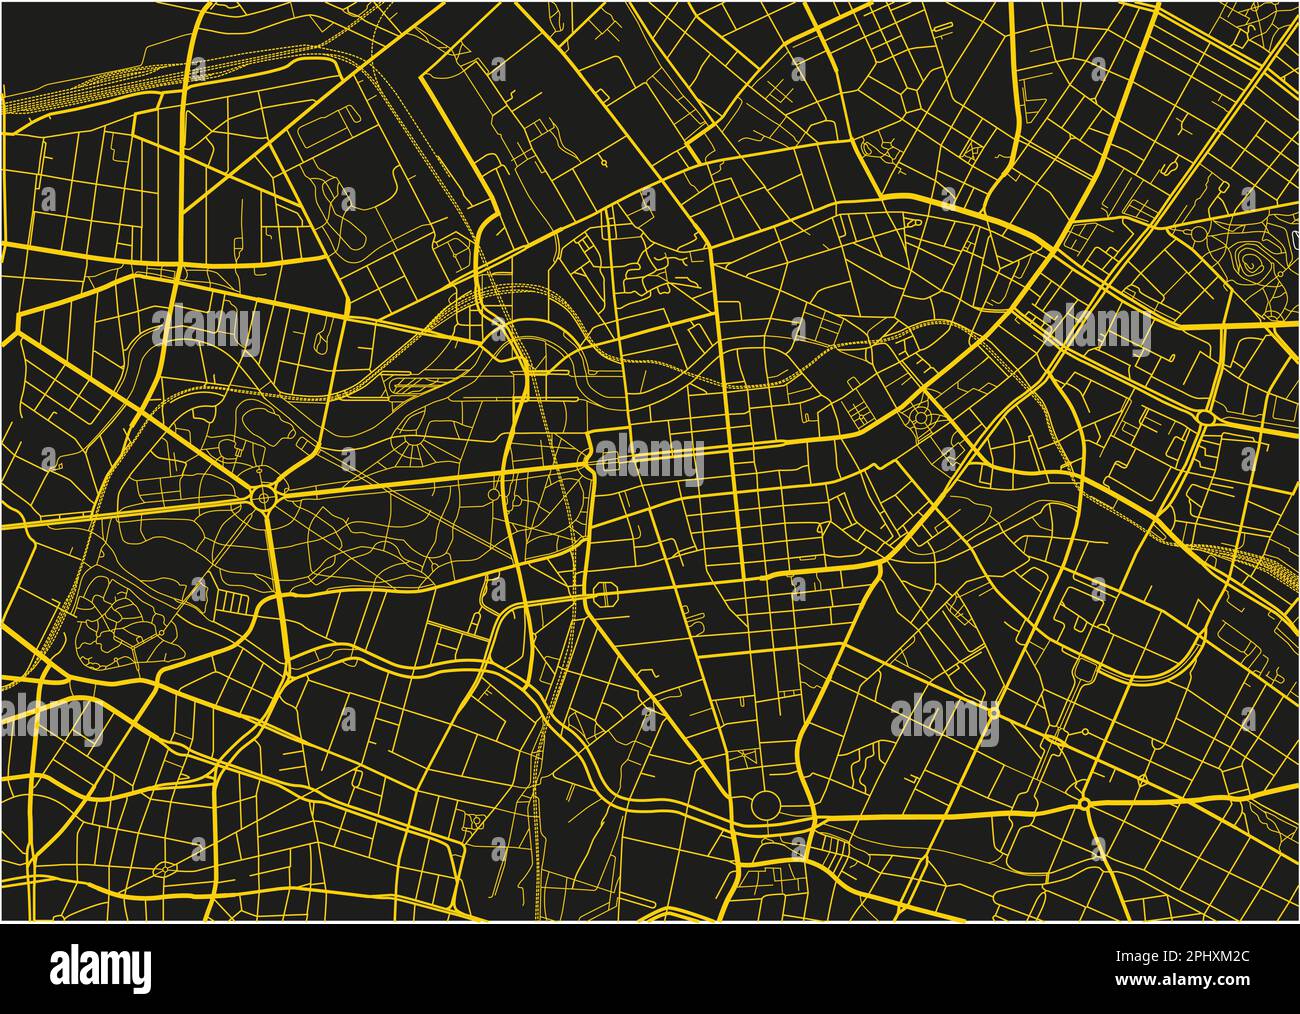 Black and yellow vector city map of Berlin with well organized separated layers. Stock Vector